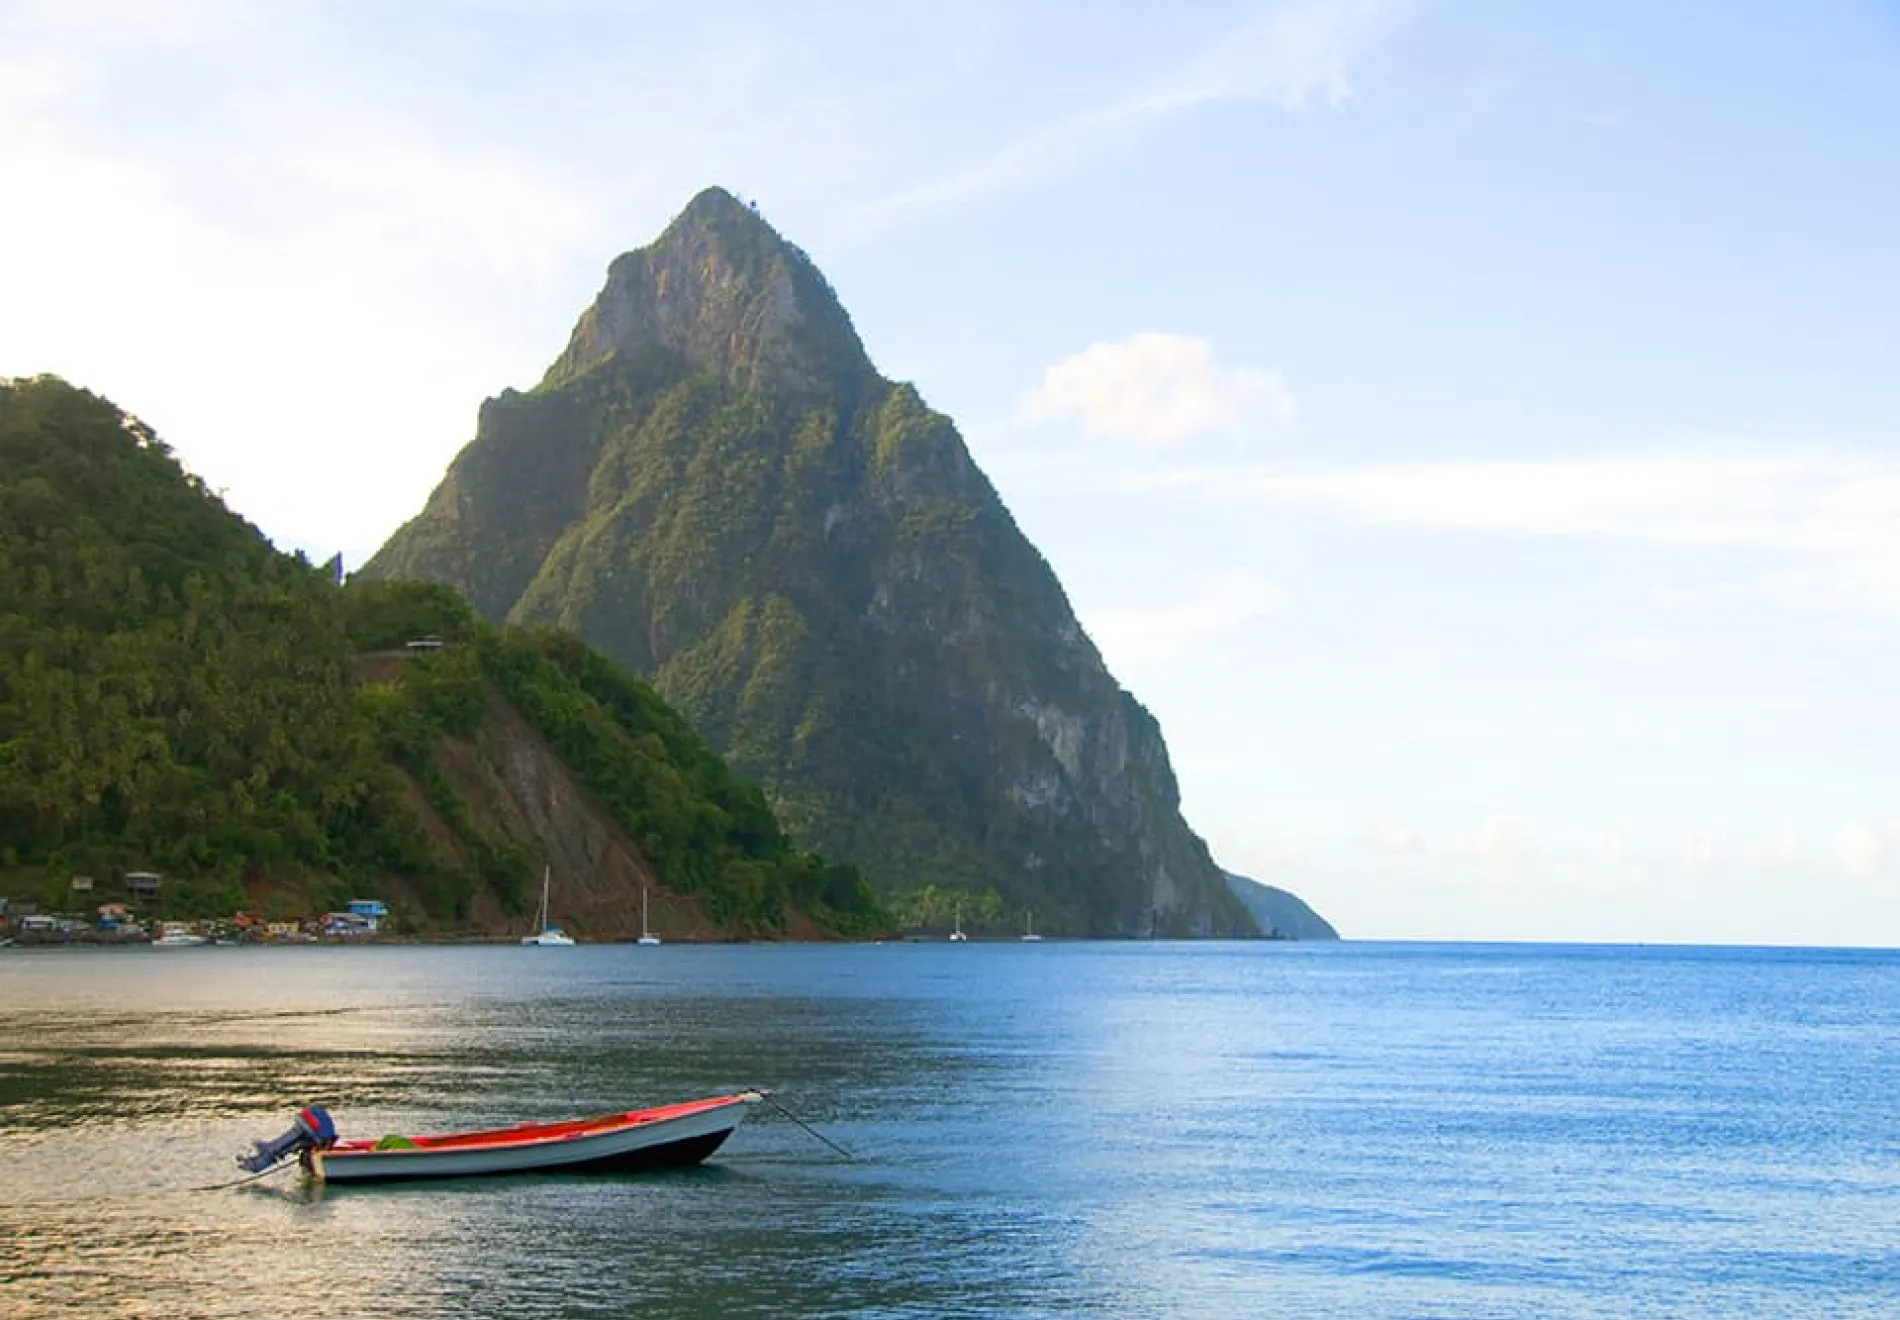 Soufriere-st.-lucia-twin-piton-mountain-peaks-with-fishing-boat